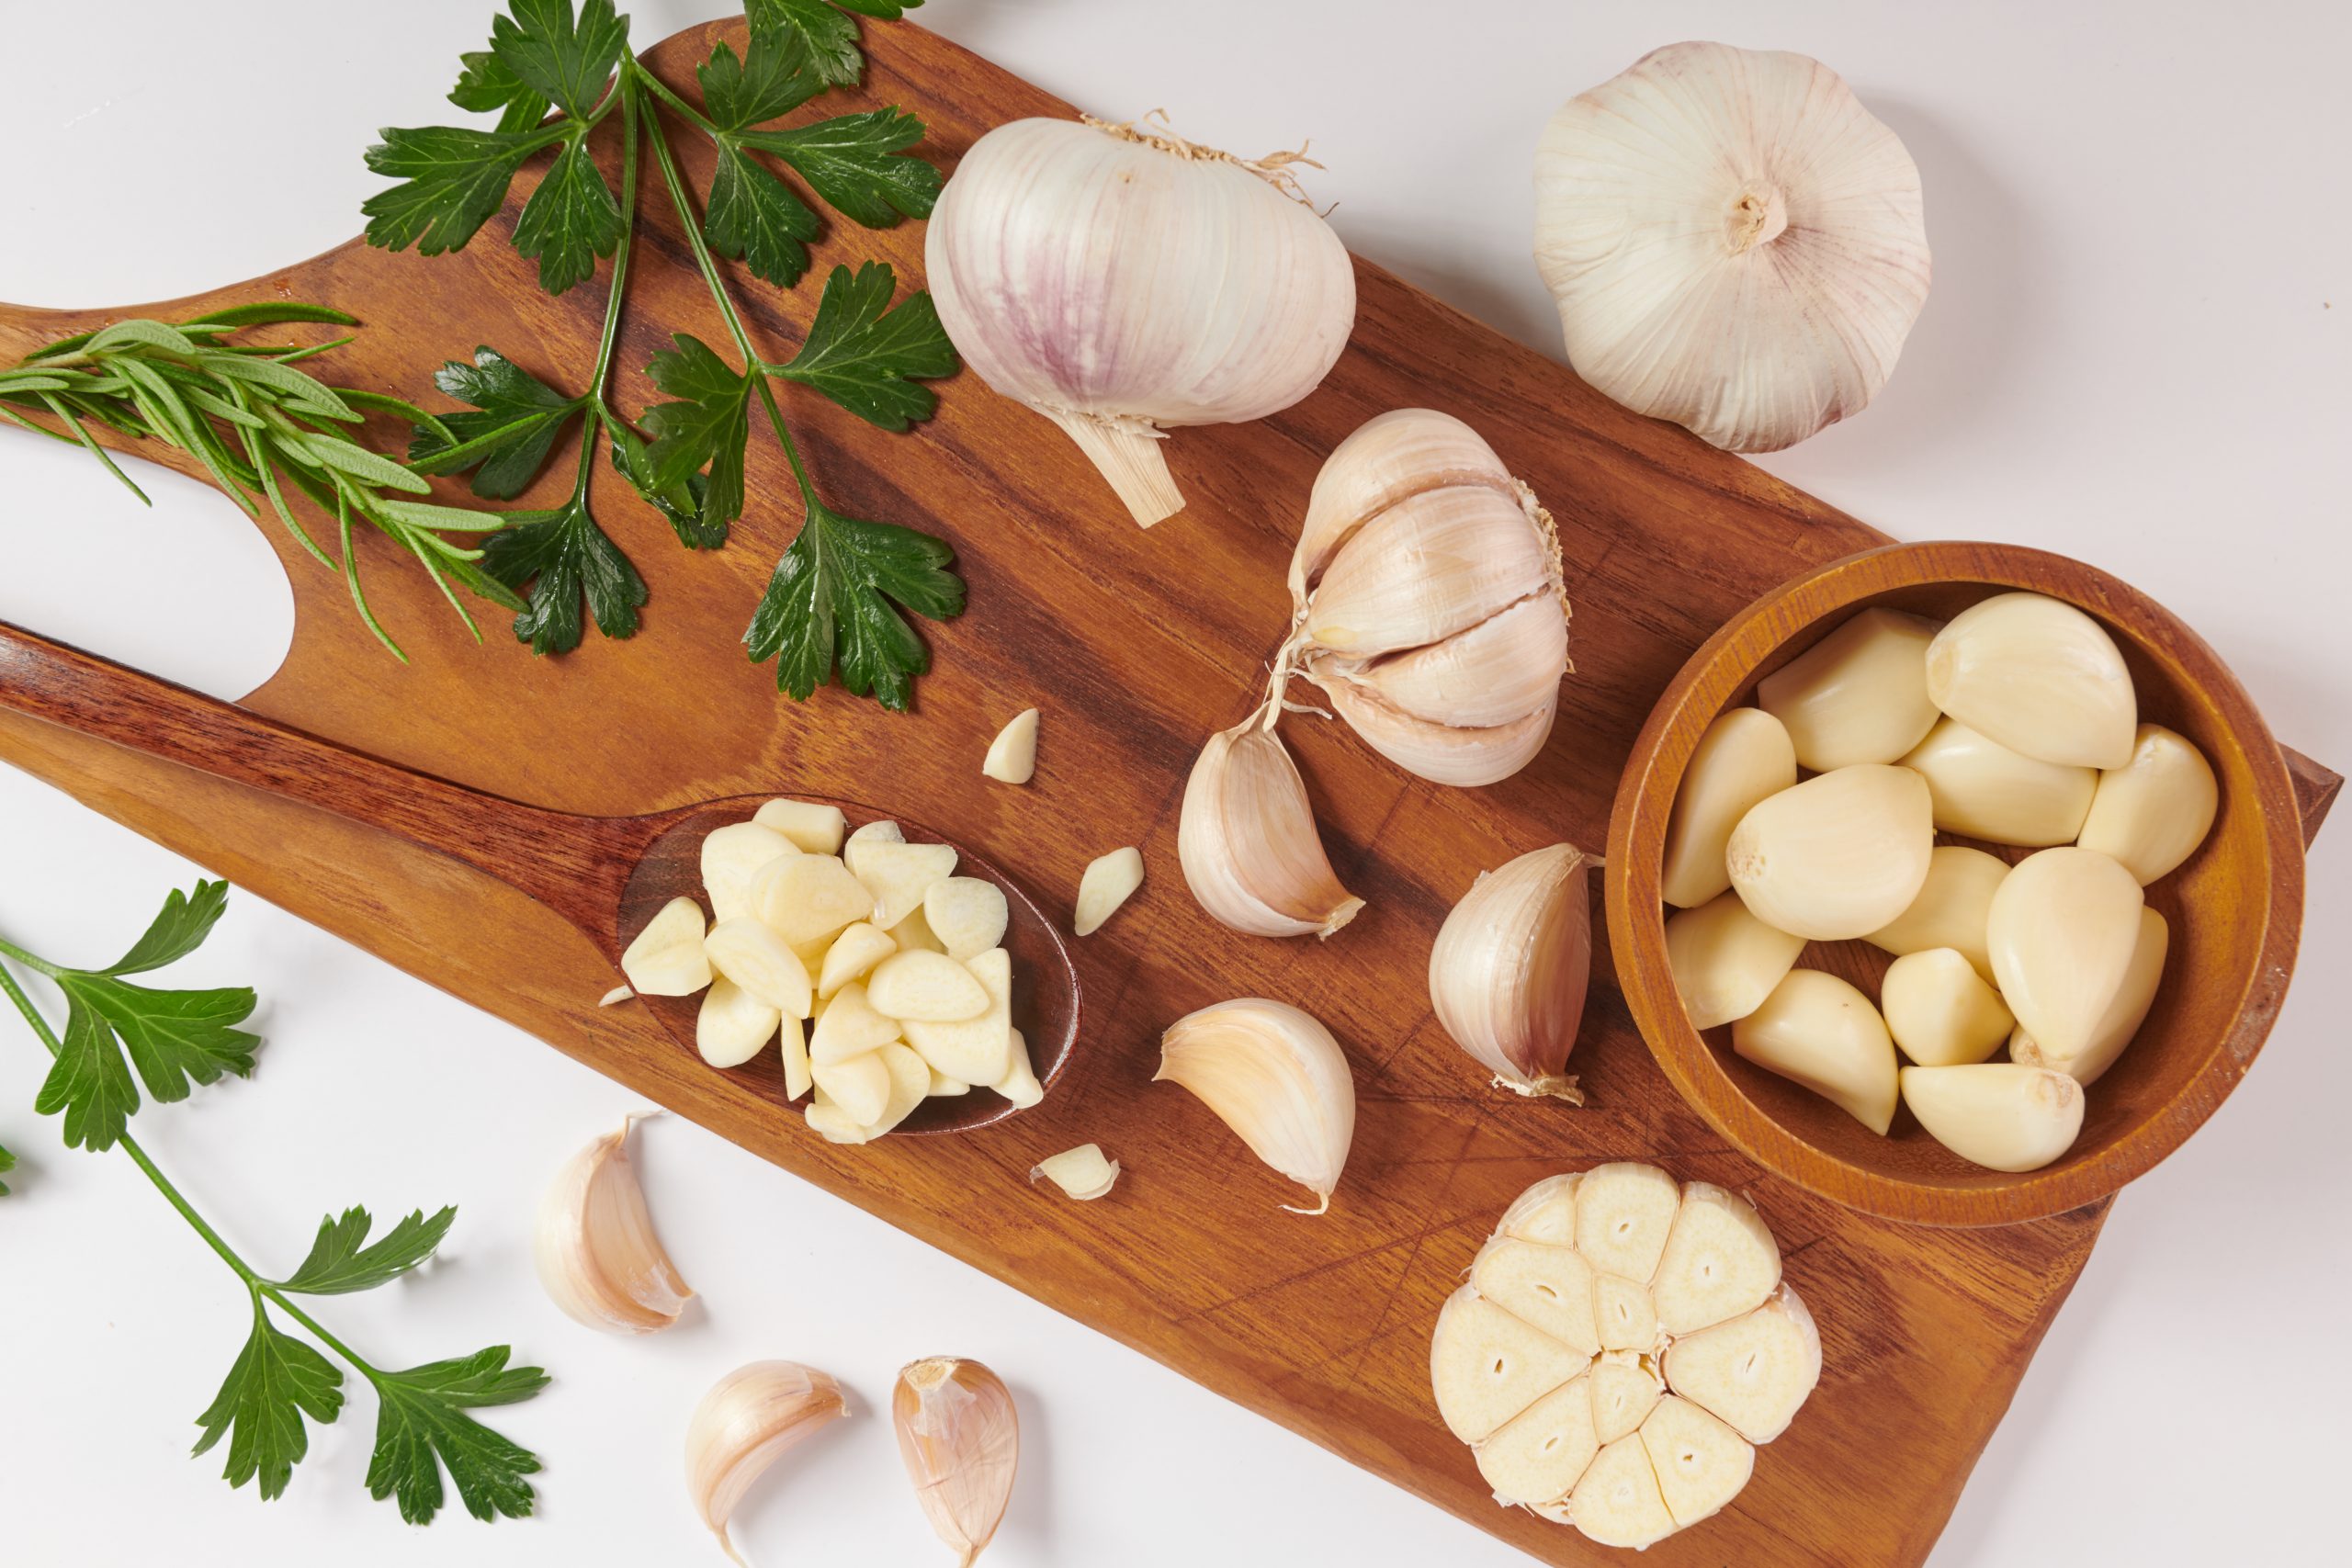 garlic with rosemary, parsley and peppercorn  on a wooden board isolated on white background. Top view. Flat lay pattern. freshly picked from home growth organic garden. Food concept.